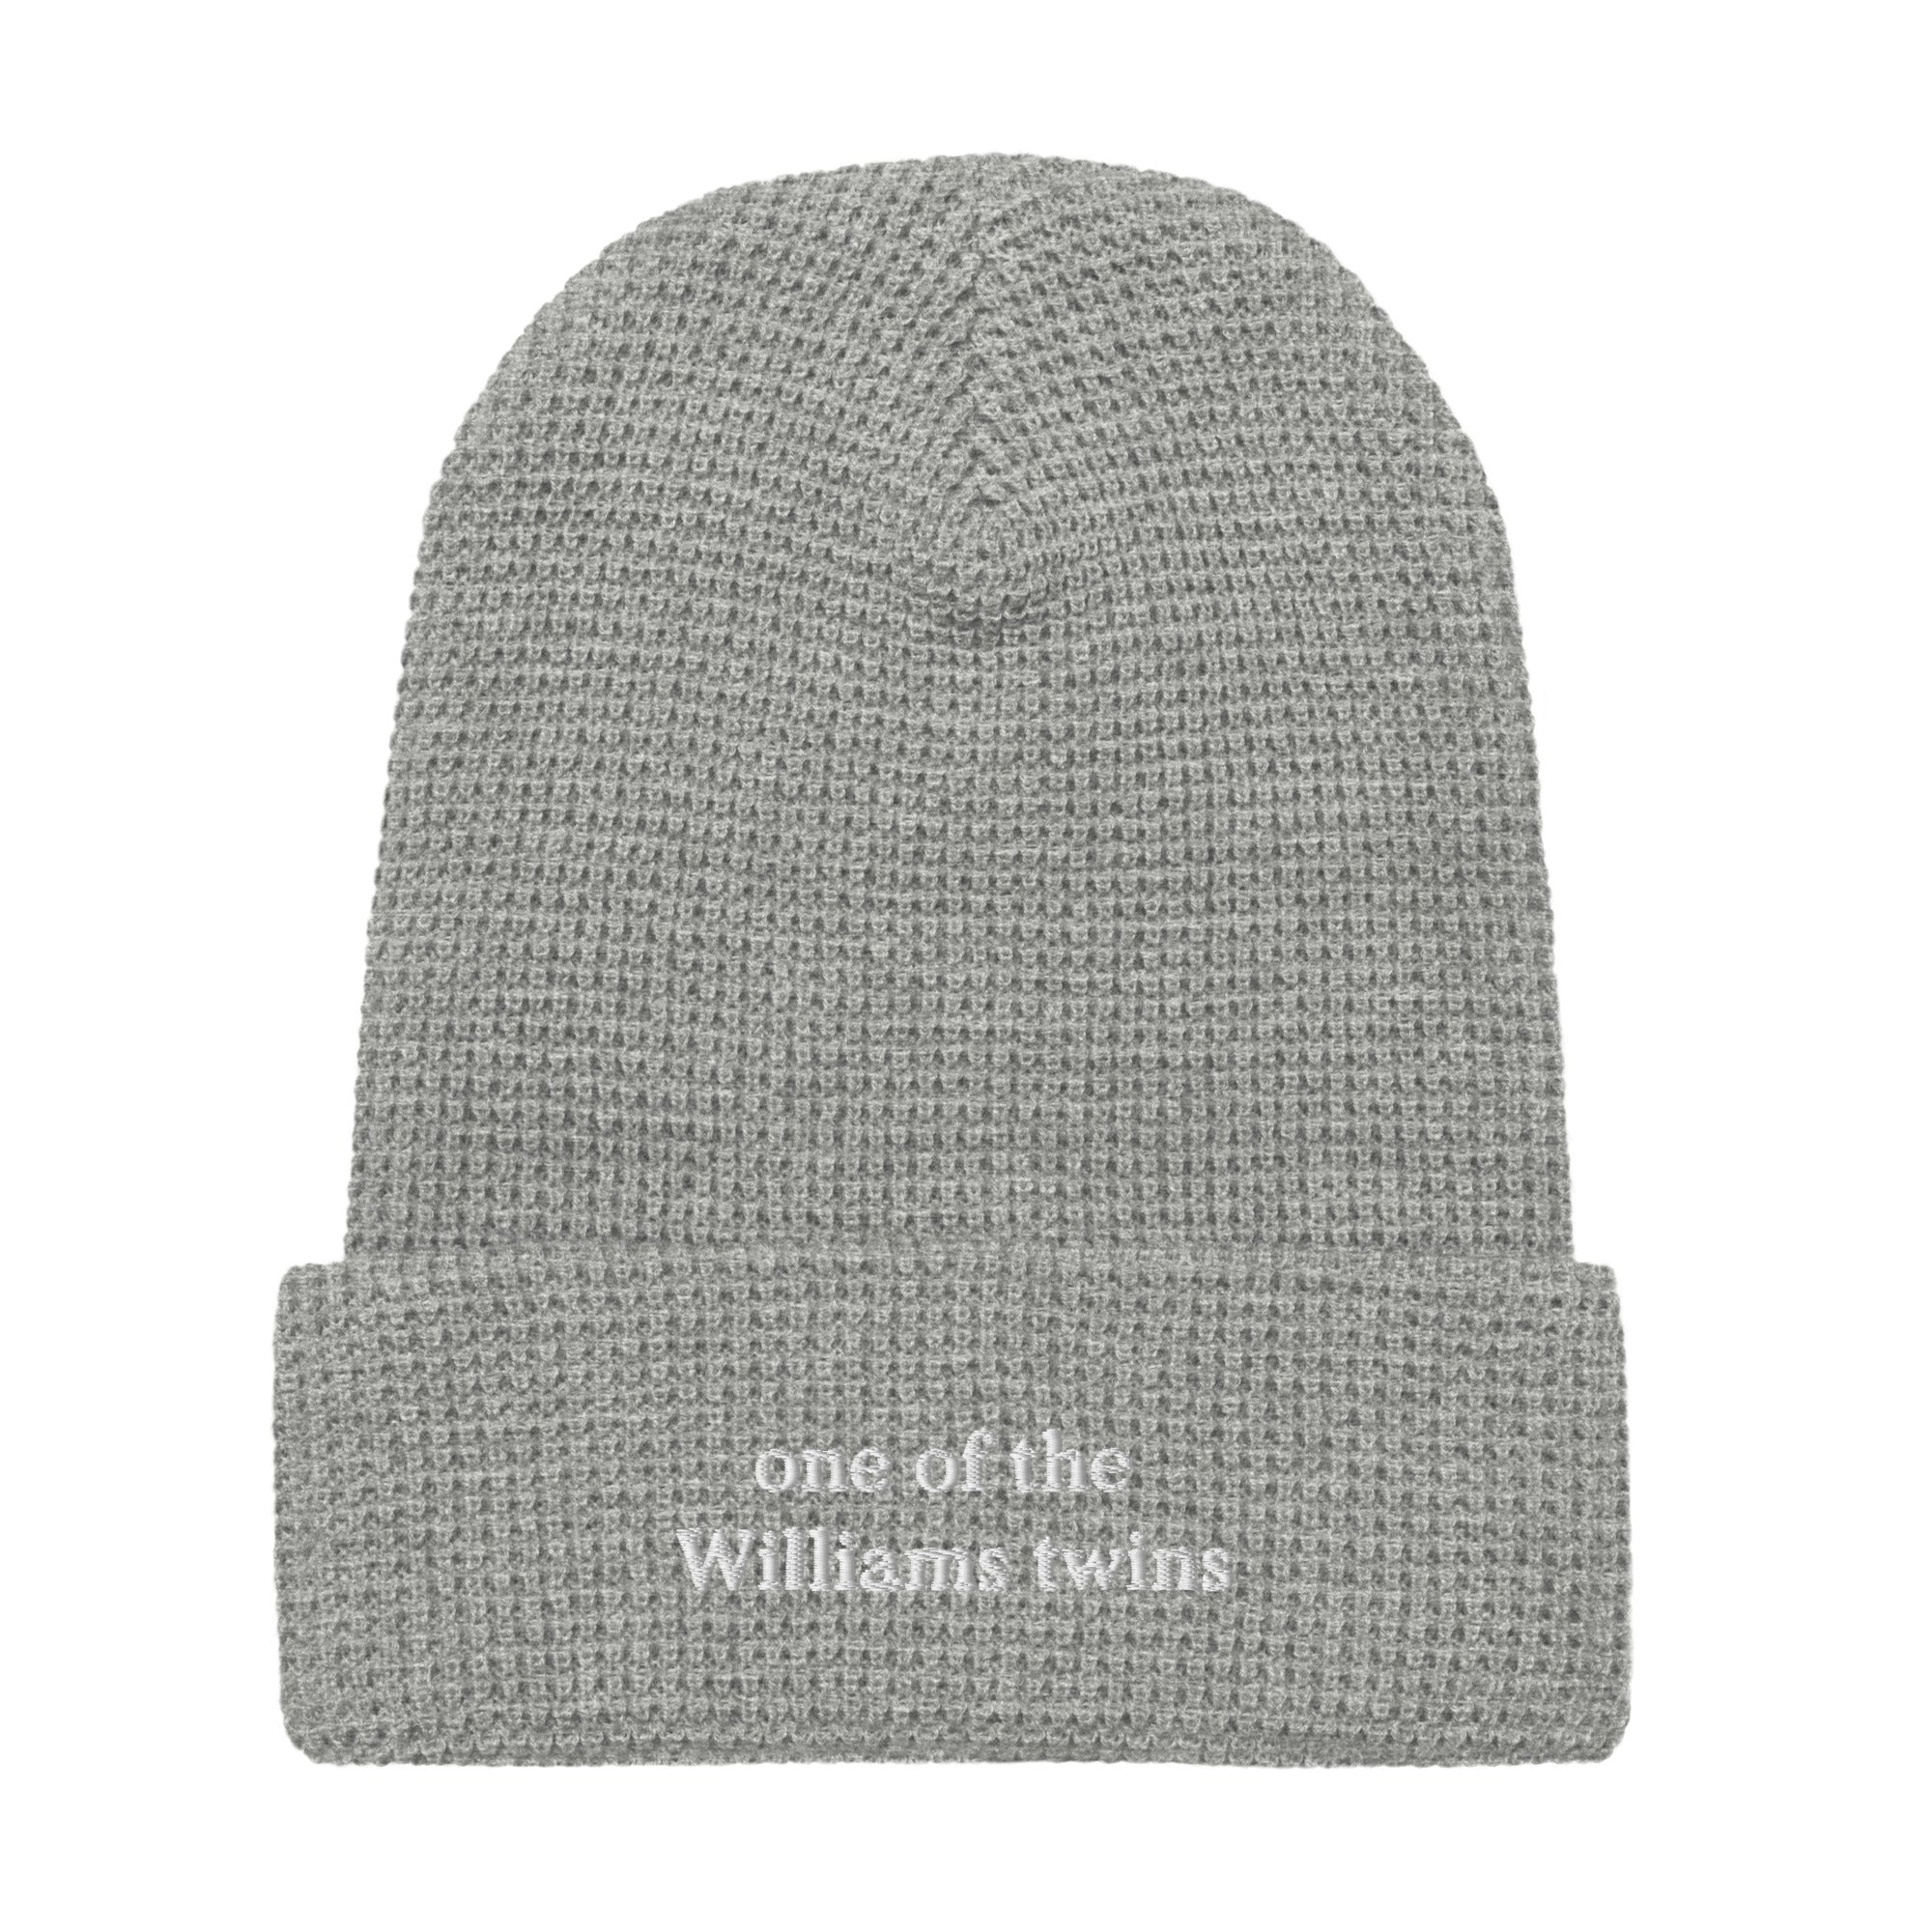 Customizable One of the ... Twins beanie - Twinning Store